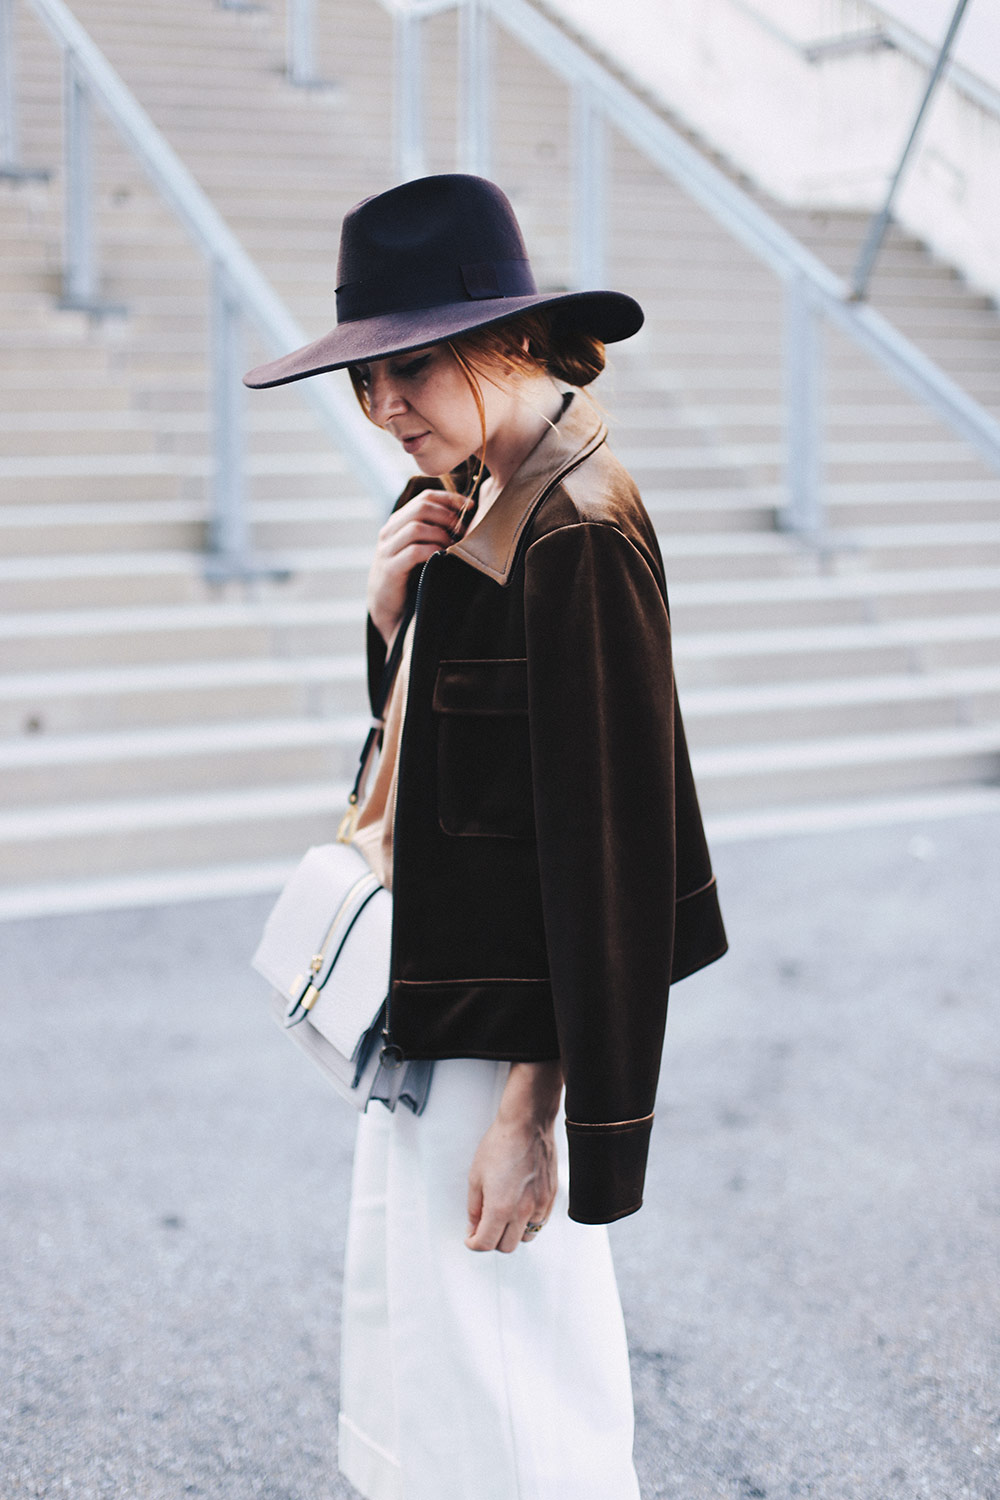 So integriere ich den Samt-Trend in einem Alltags-Outfit, Herbst Outfit, Herbst Trends, Fashion Magazin, Fashion Blog, Modeblog, Culotte, Streetstyle, whoismocca.com